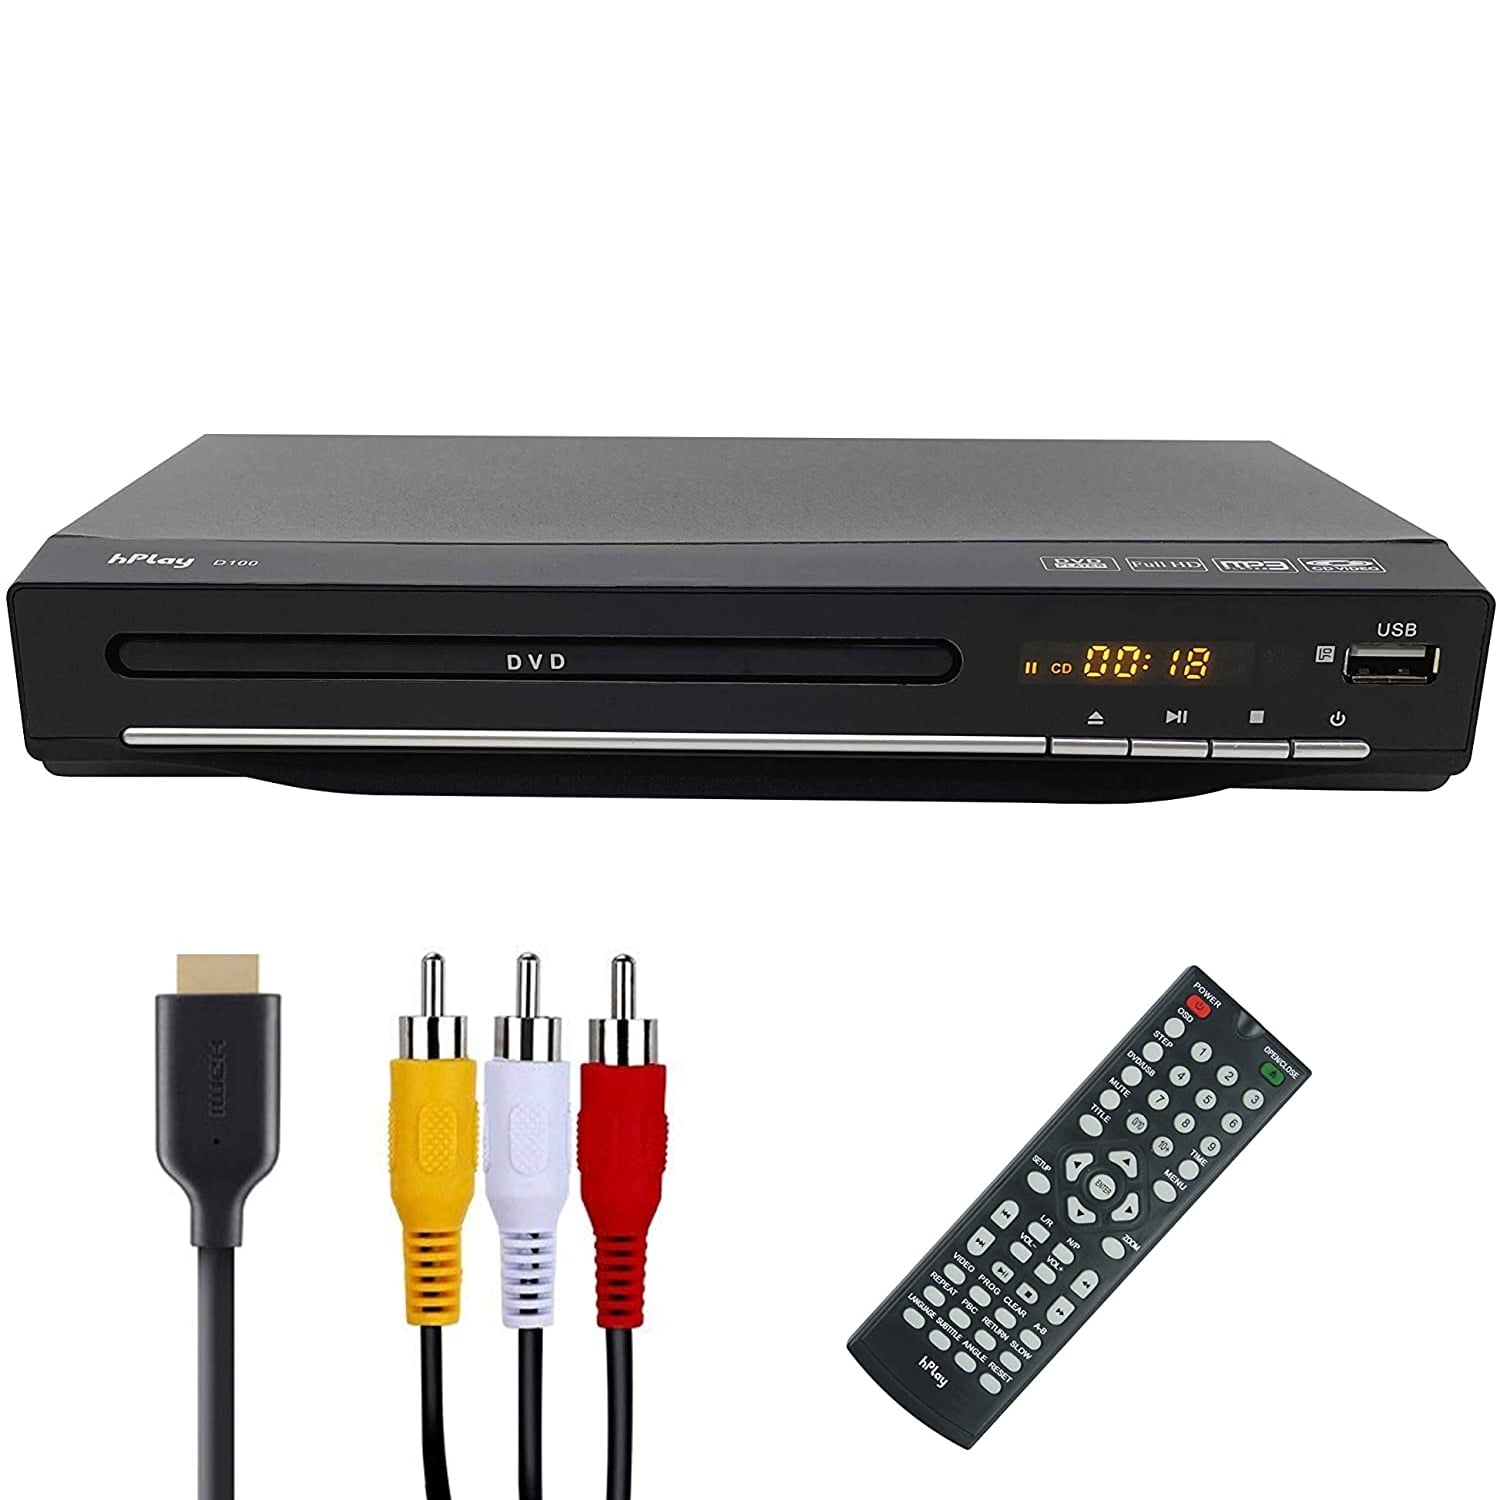 hPlay Compact Desktop DVD Media Player for TV, Free, HDMI & RCA Output, USB Port, Built in PAL/NTSC, RCA(AV) Cable, HDMI Cable Included, Top Metal Casing for Durability - Walmart.com